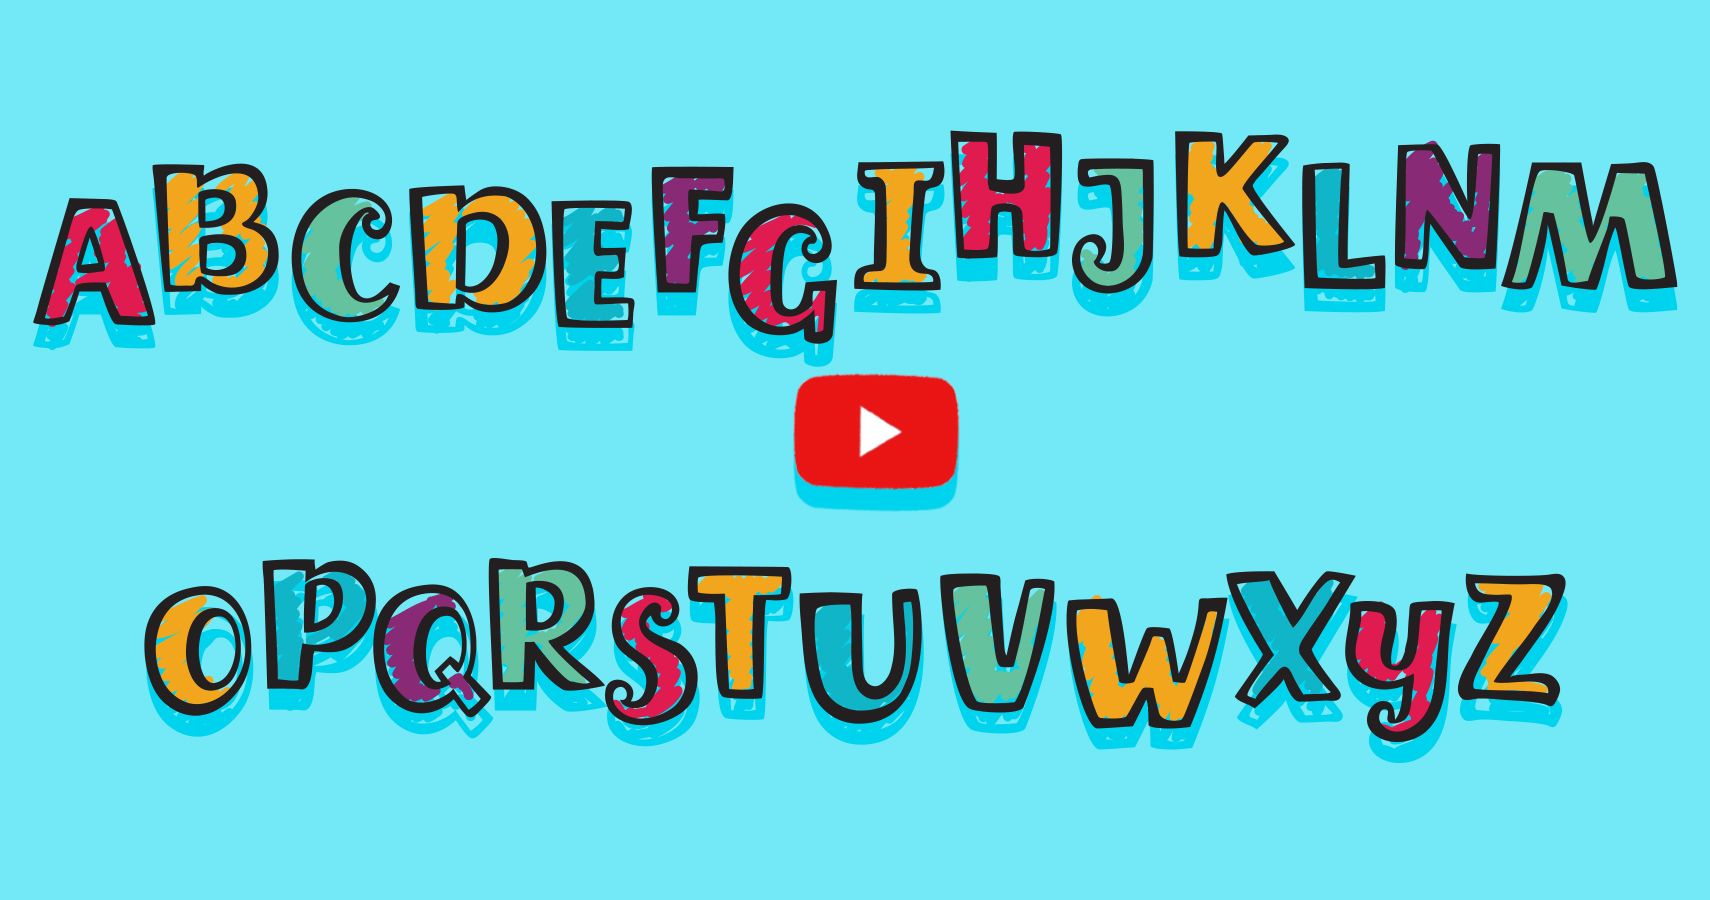 TK Videos On YouTube That Help Kids Learn The Alphabet